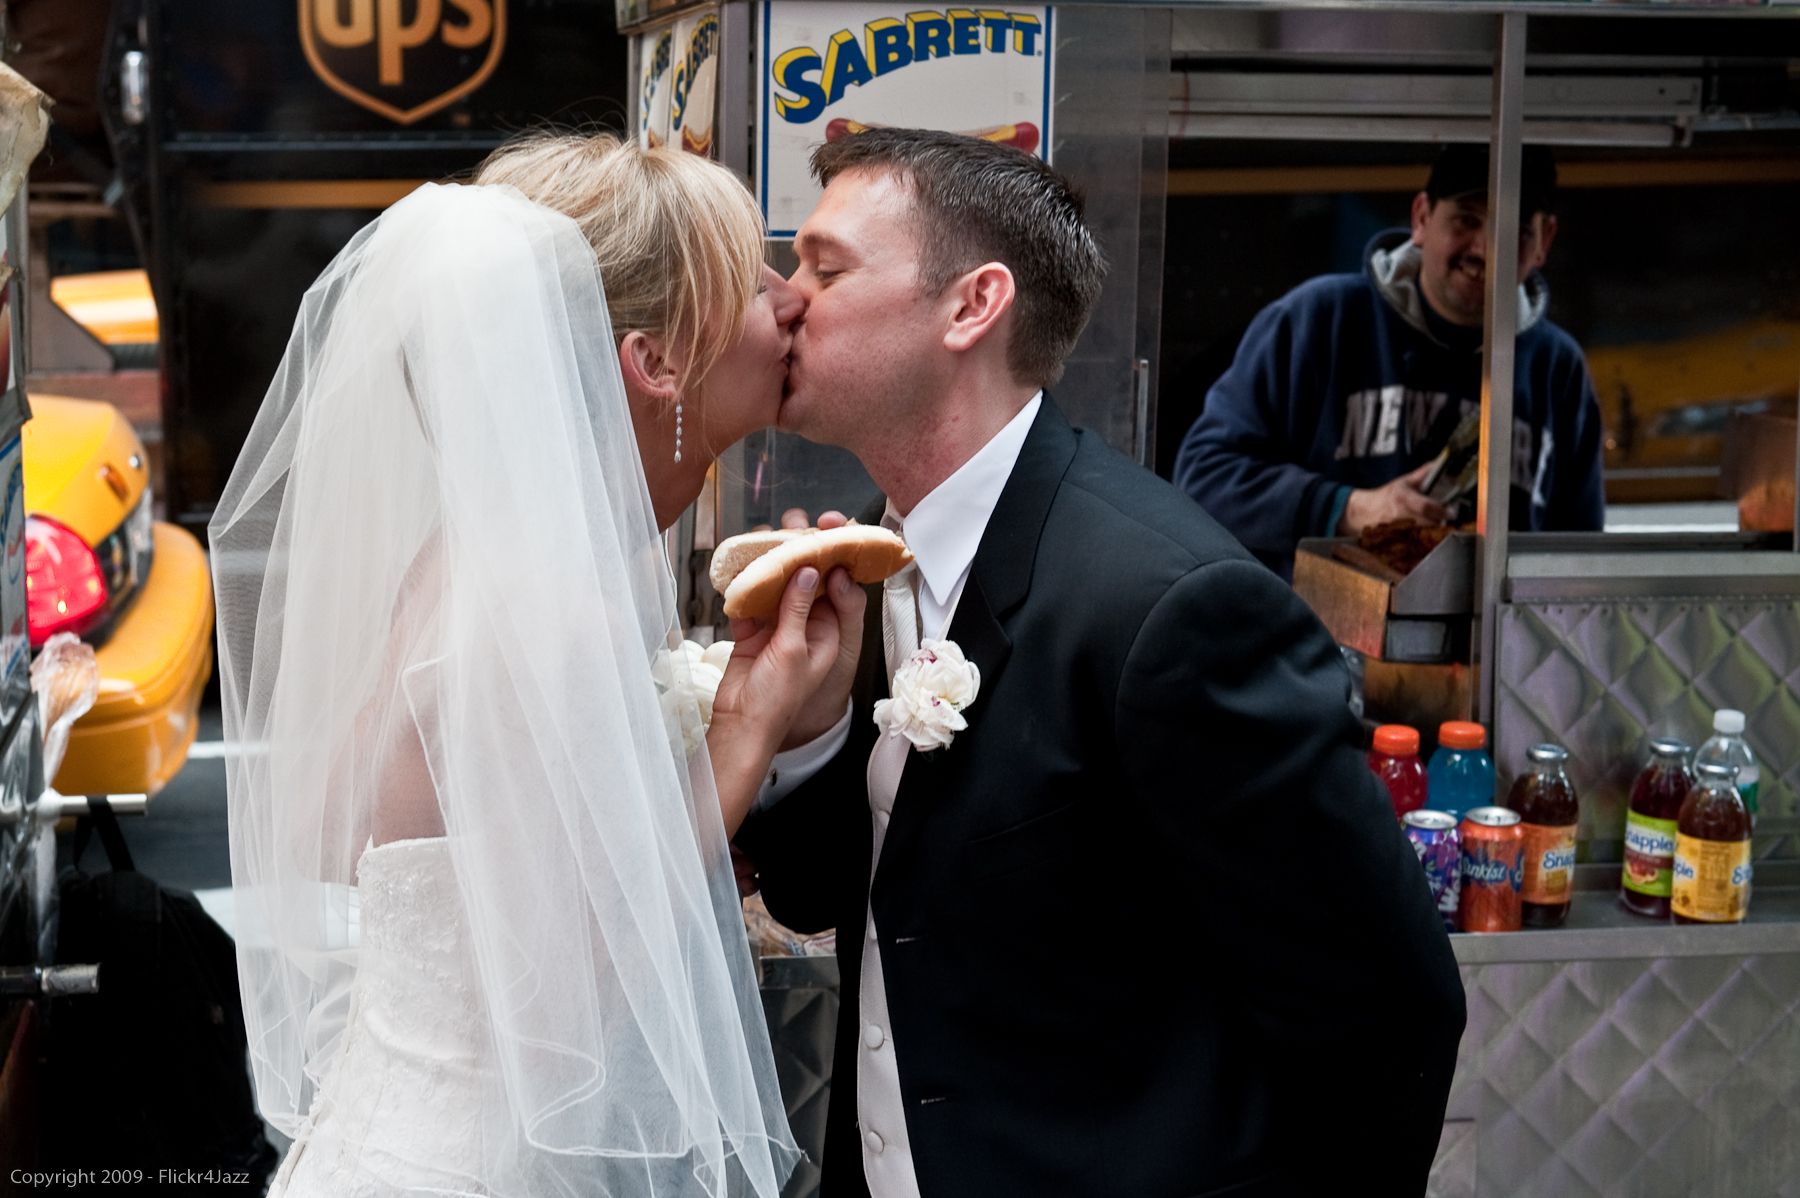 Getting Married in New York: A Step-by-Step Guide